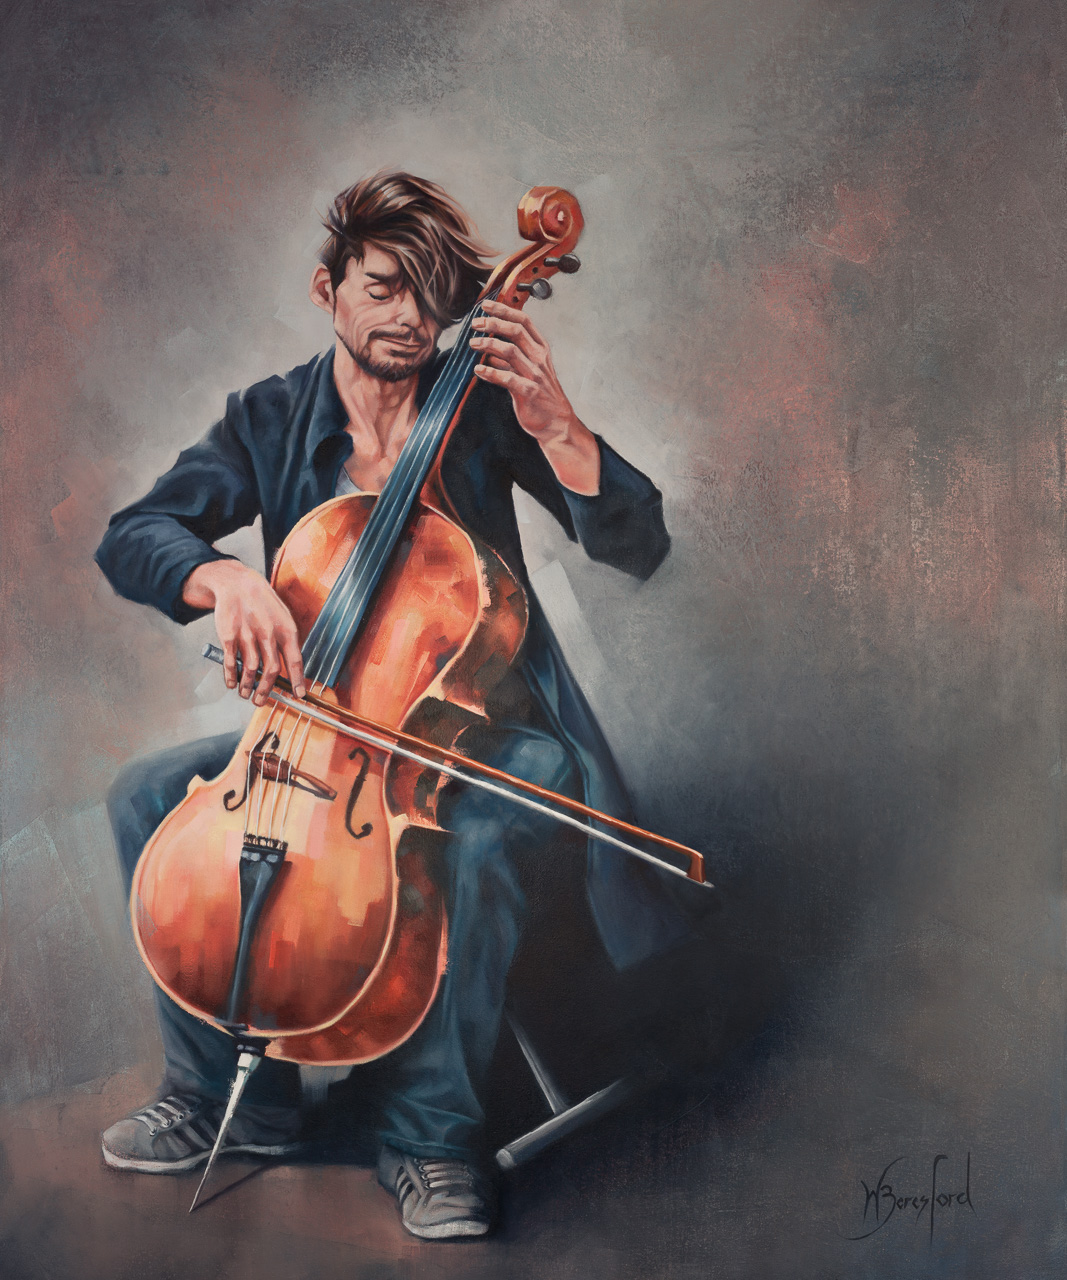 "The Busker", original oil painting on canvas by Wendy Beresford